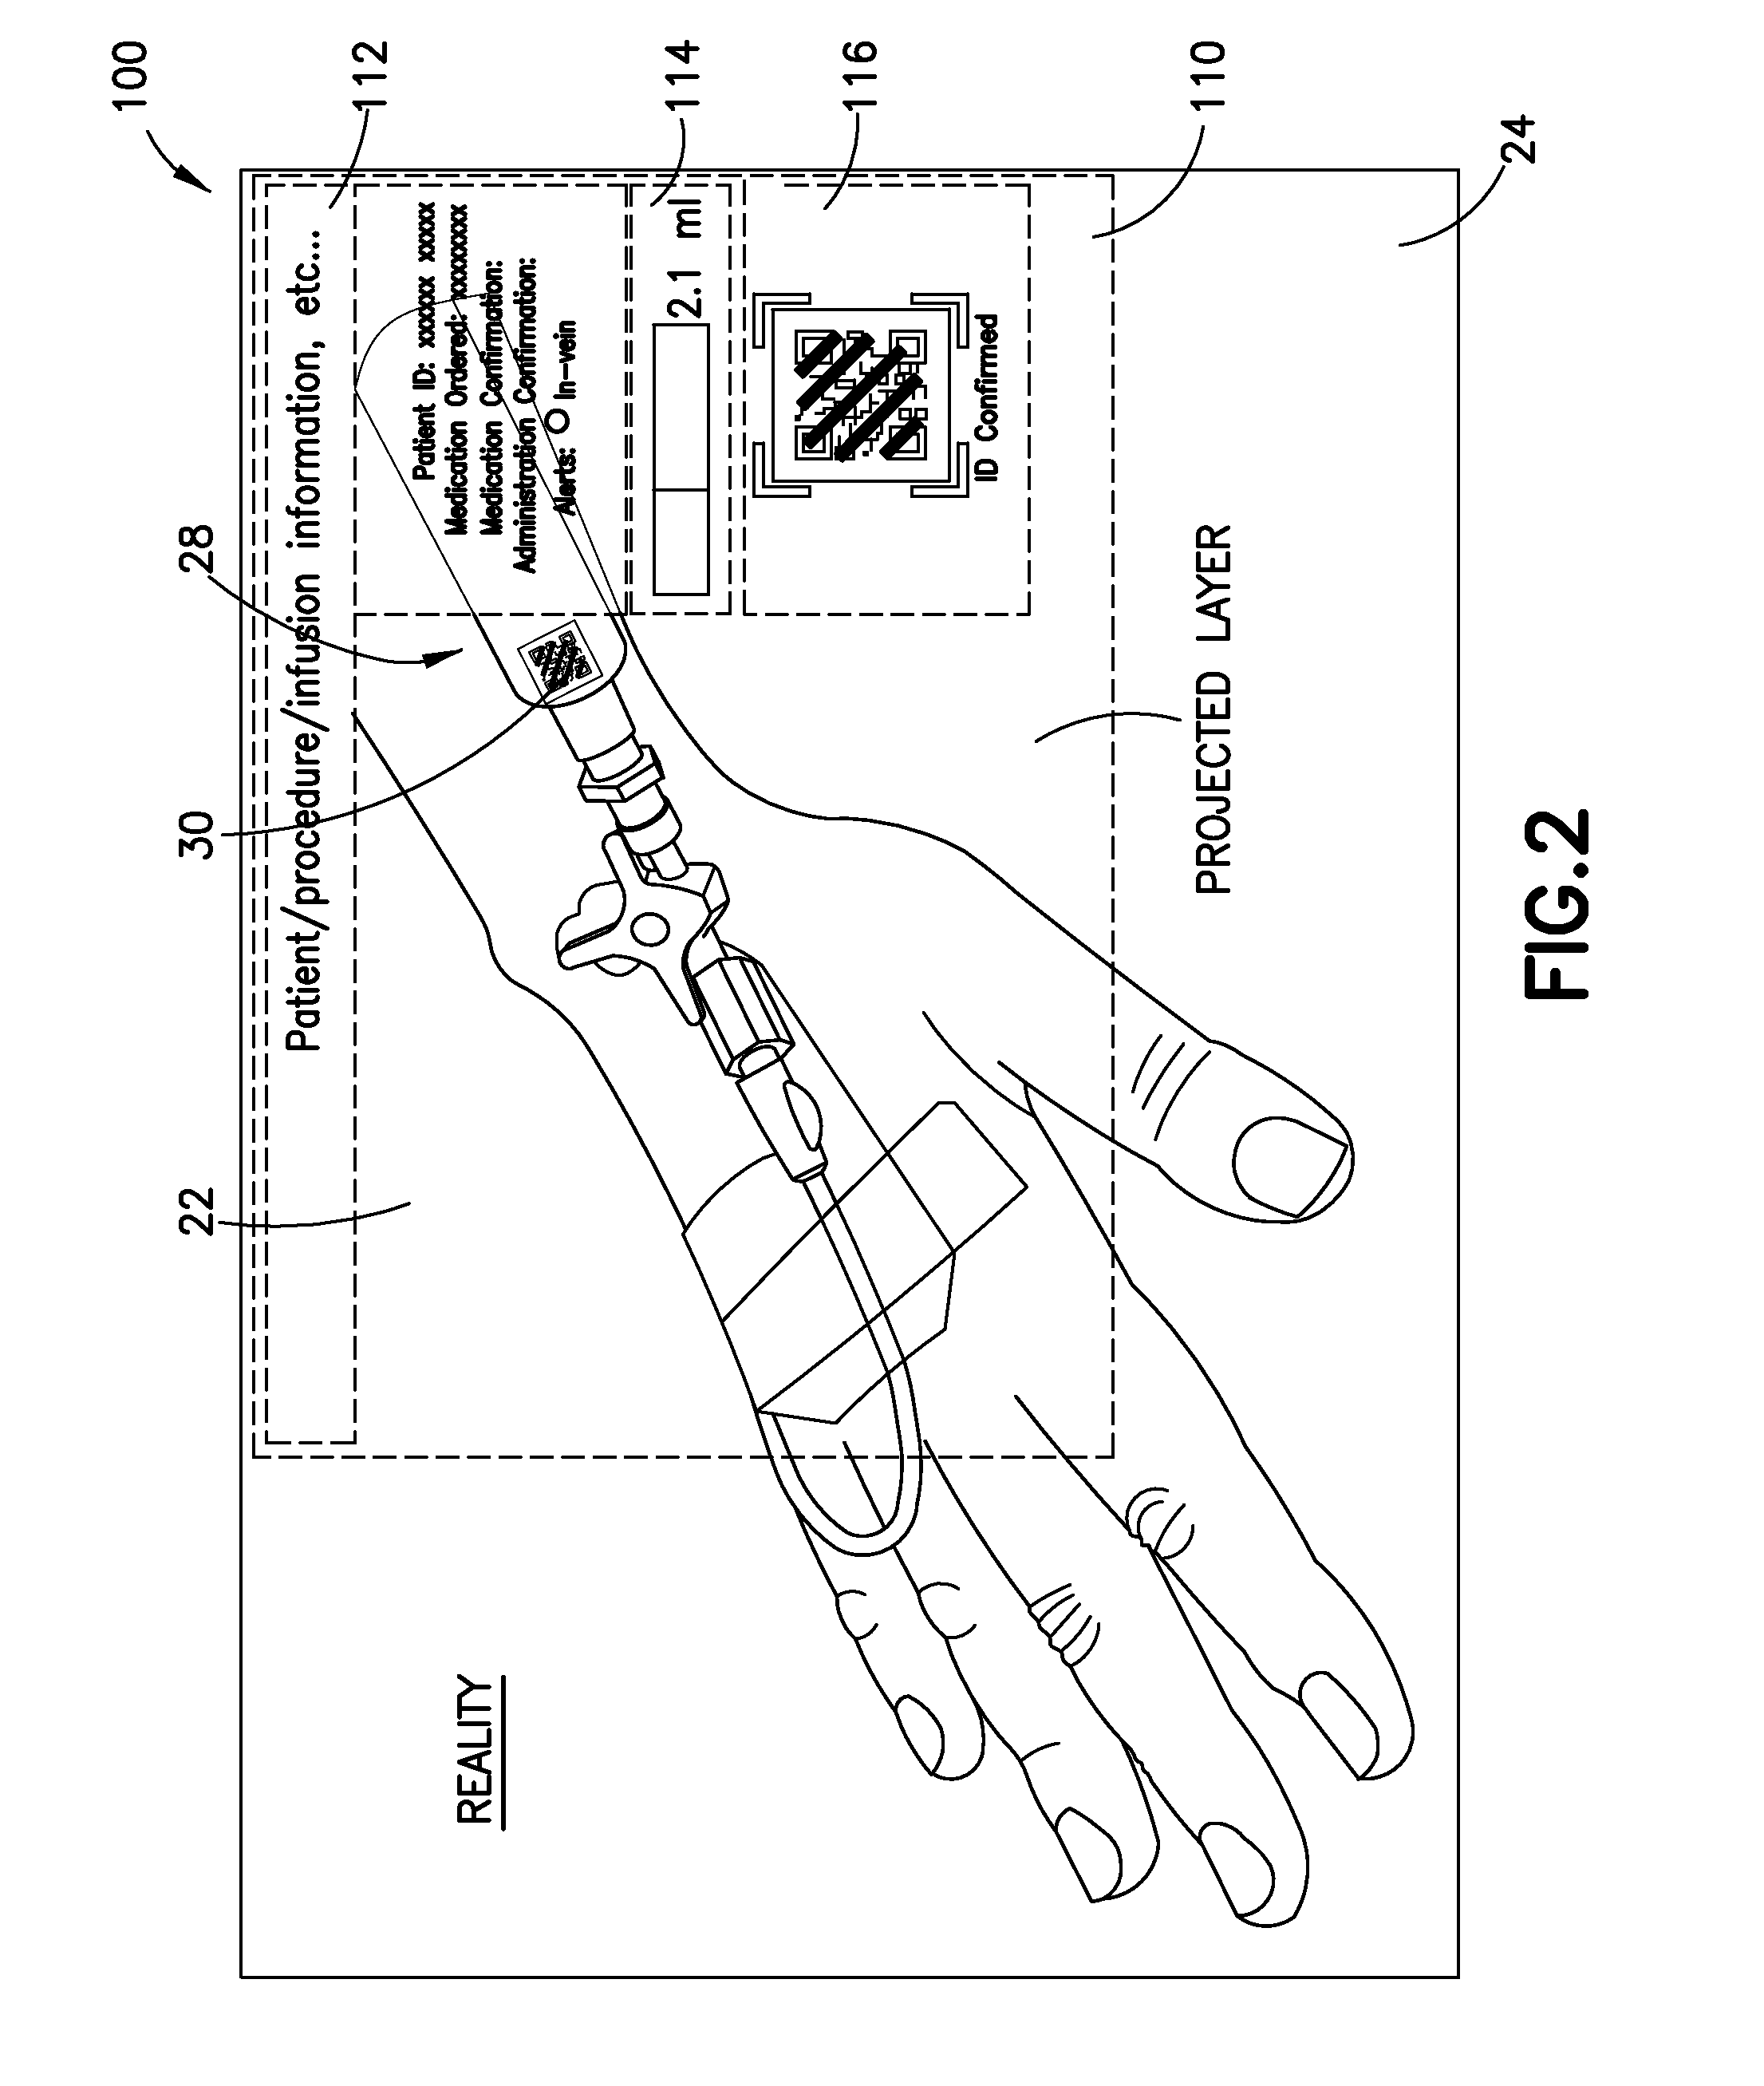 System and Method for Assuring Patient Medication and Fluid Delivery at the Clinical Point of Use